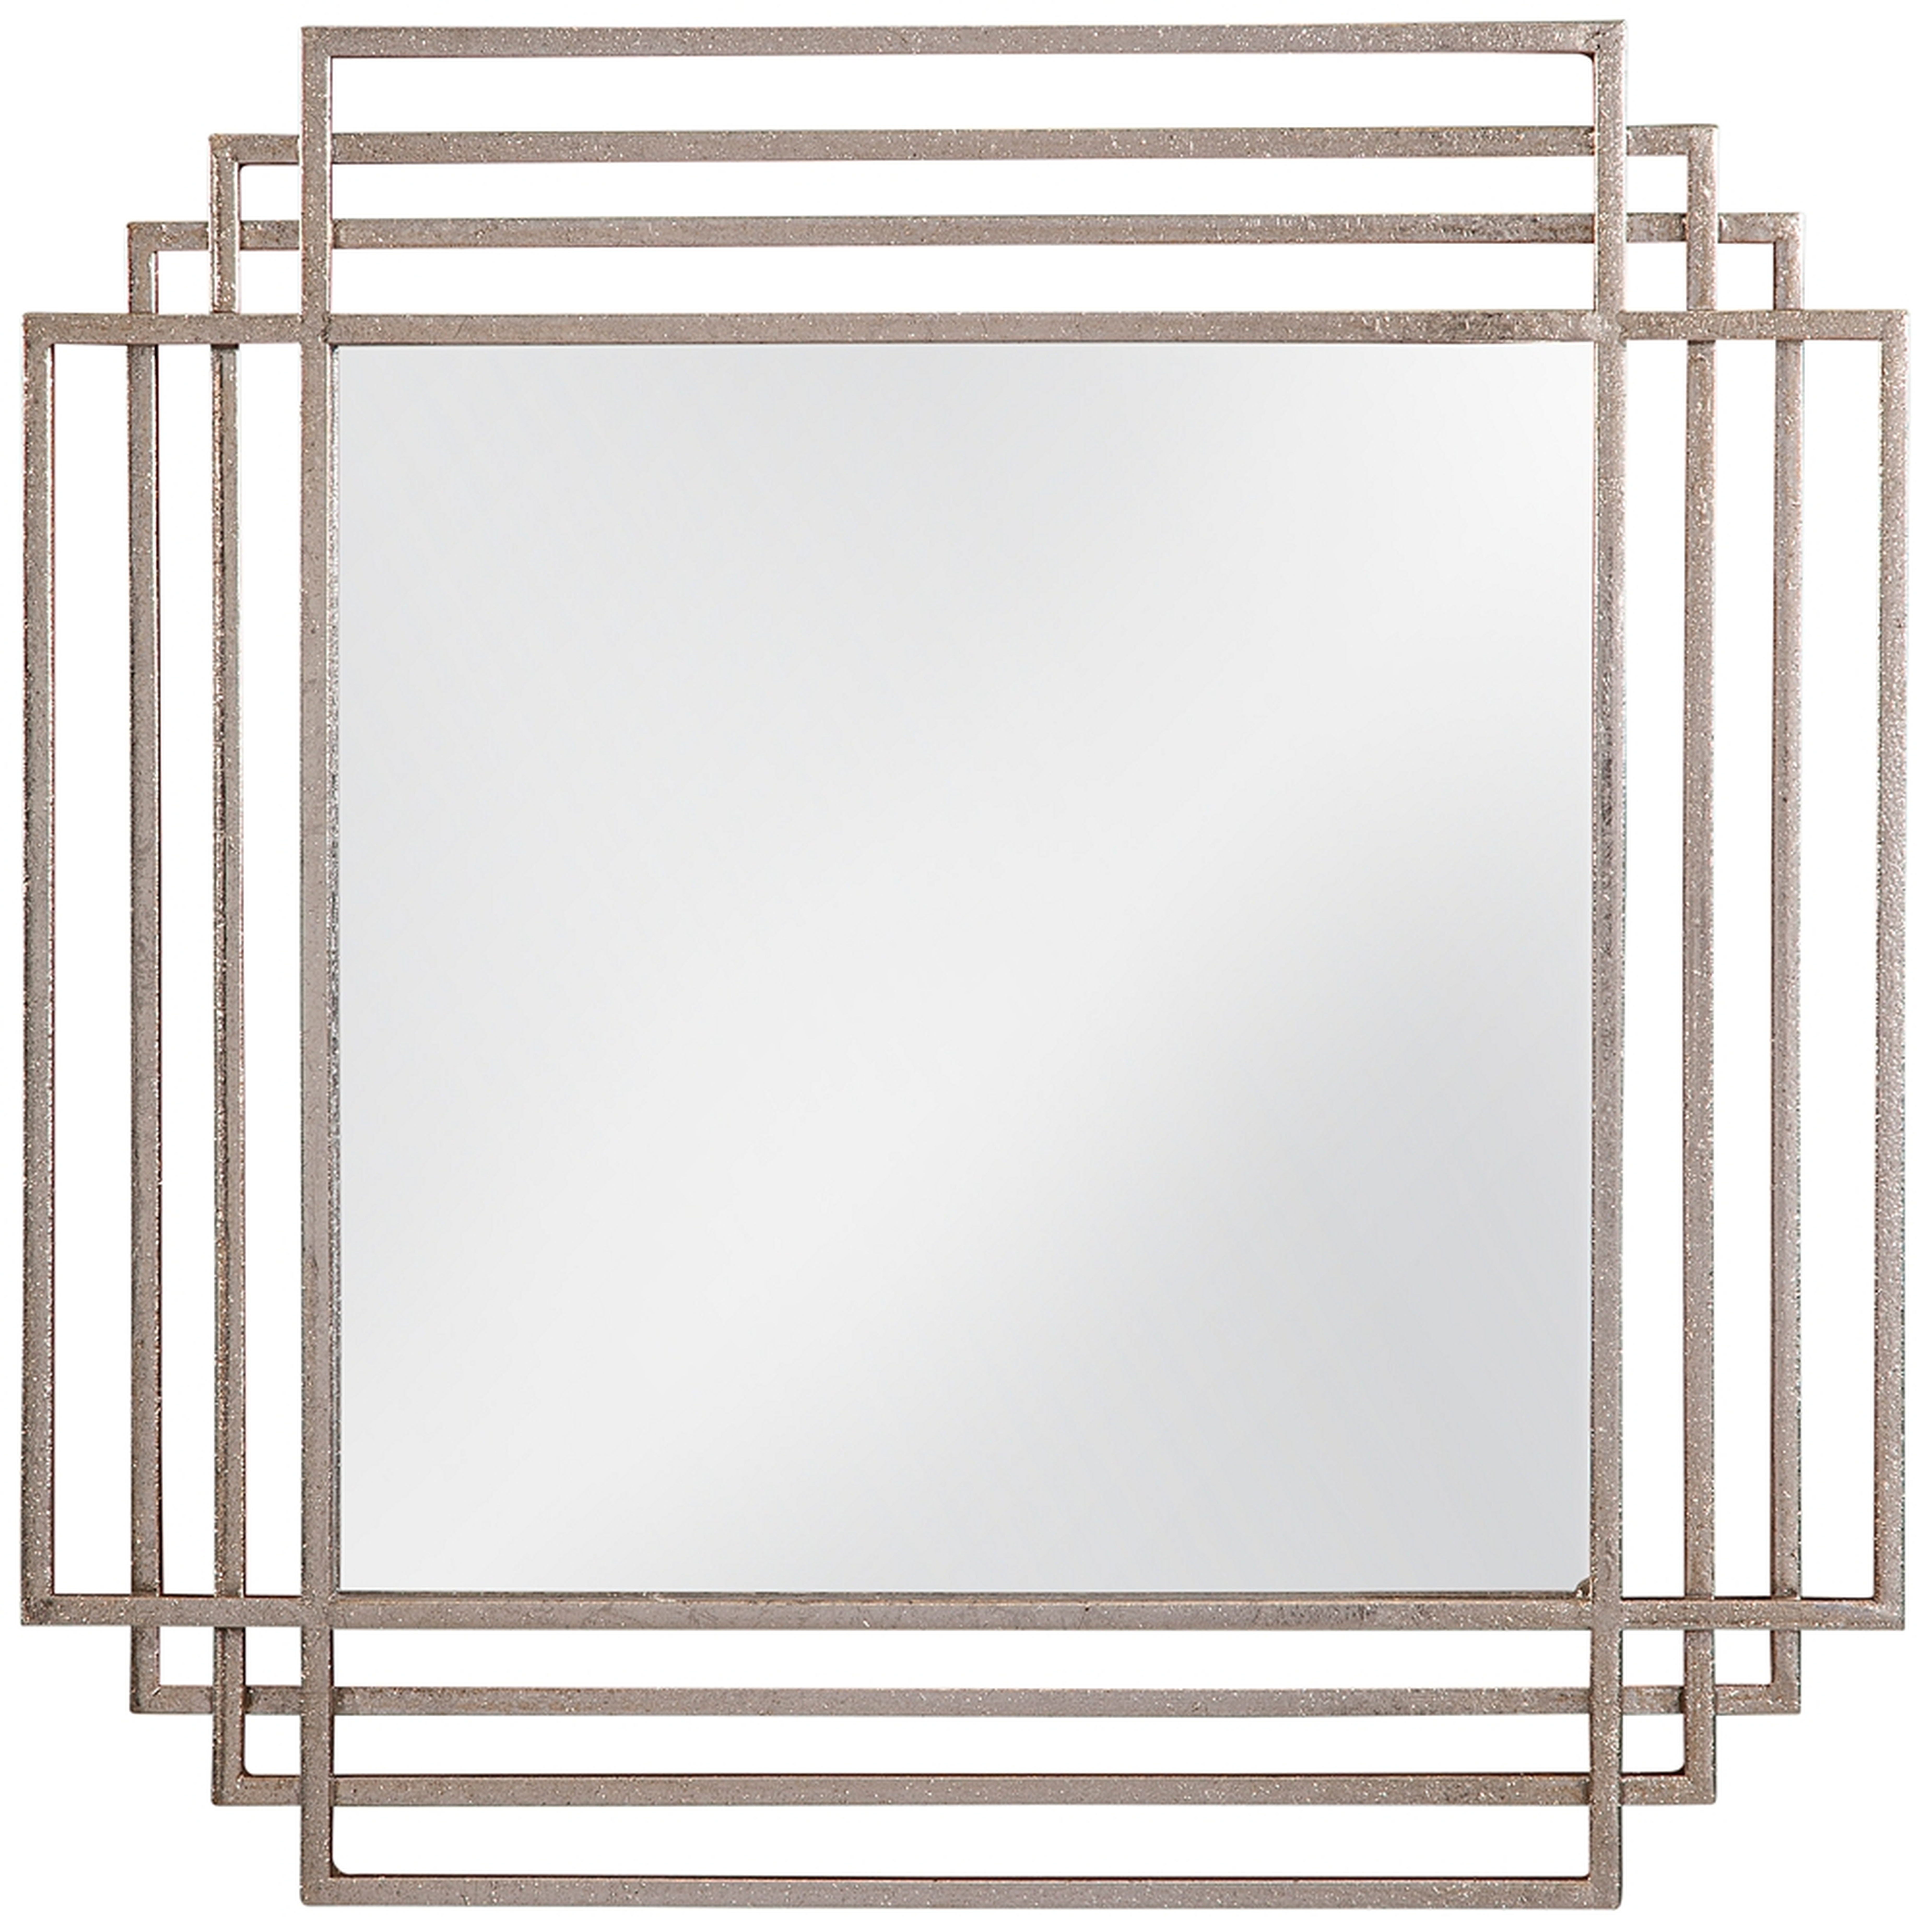 Gillis Silver Leaf Metal 24" Square Wall Mirror - Style # 403E0 - Lamps Plus